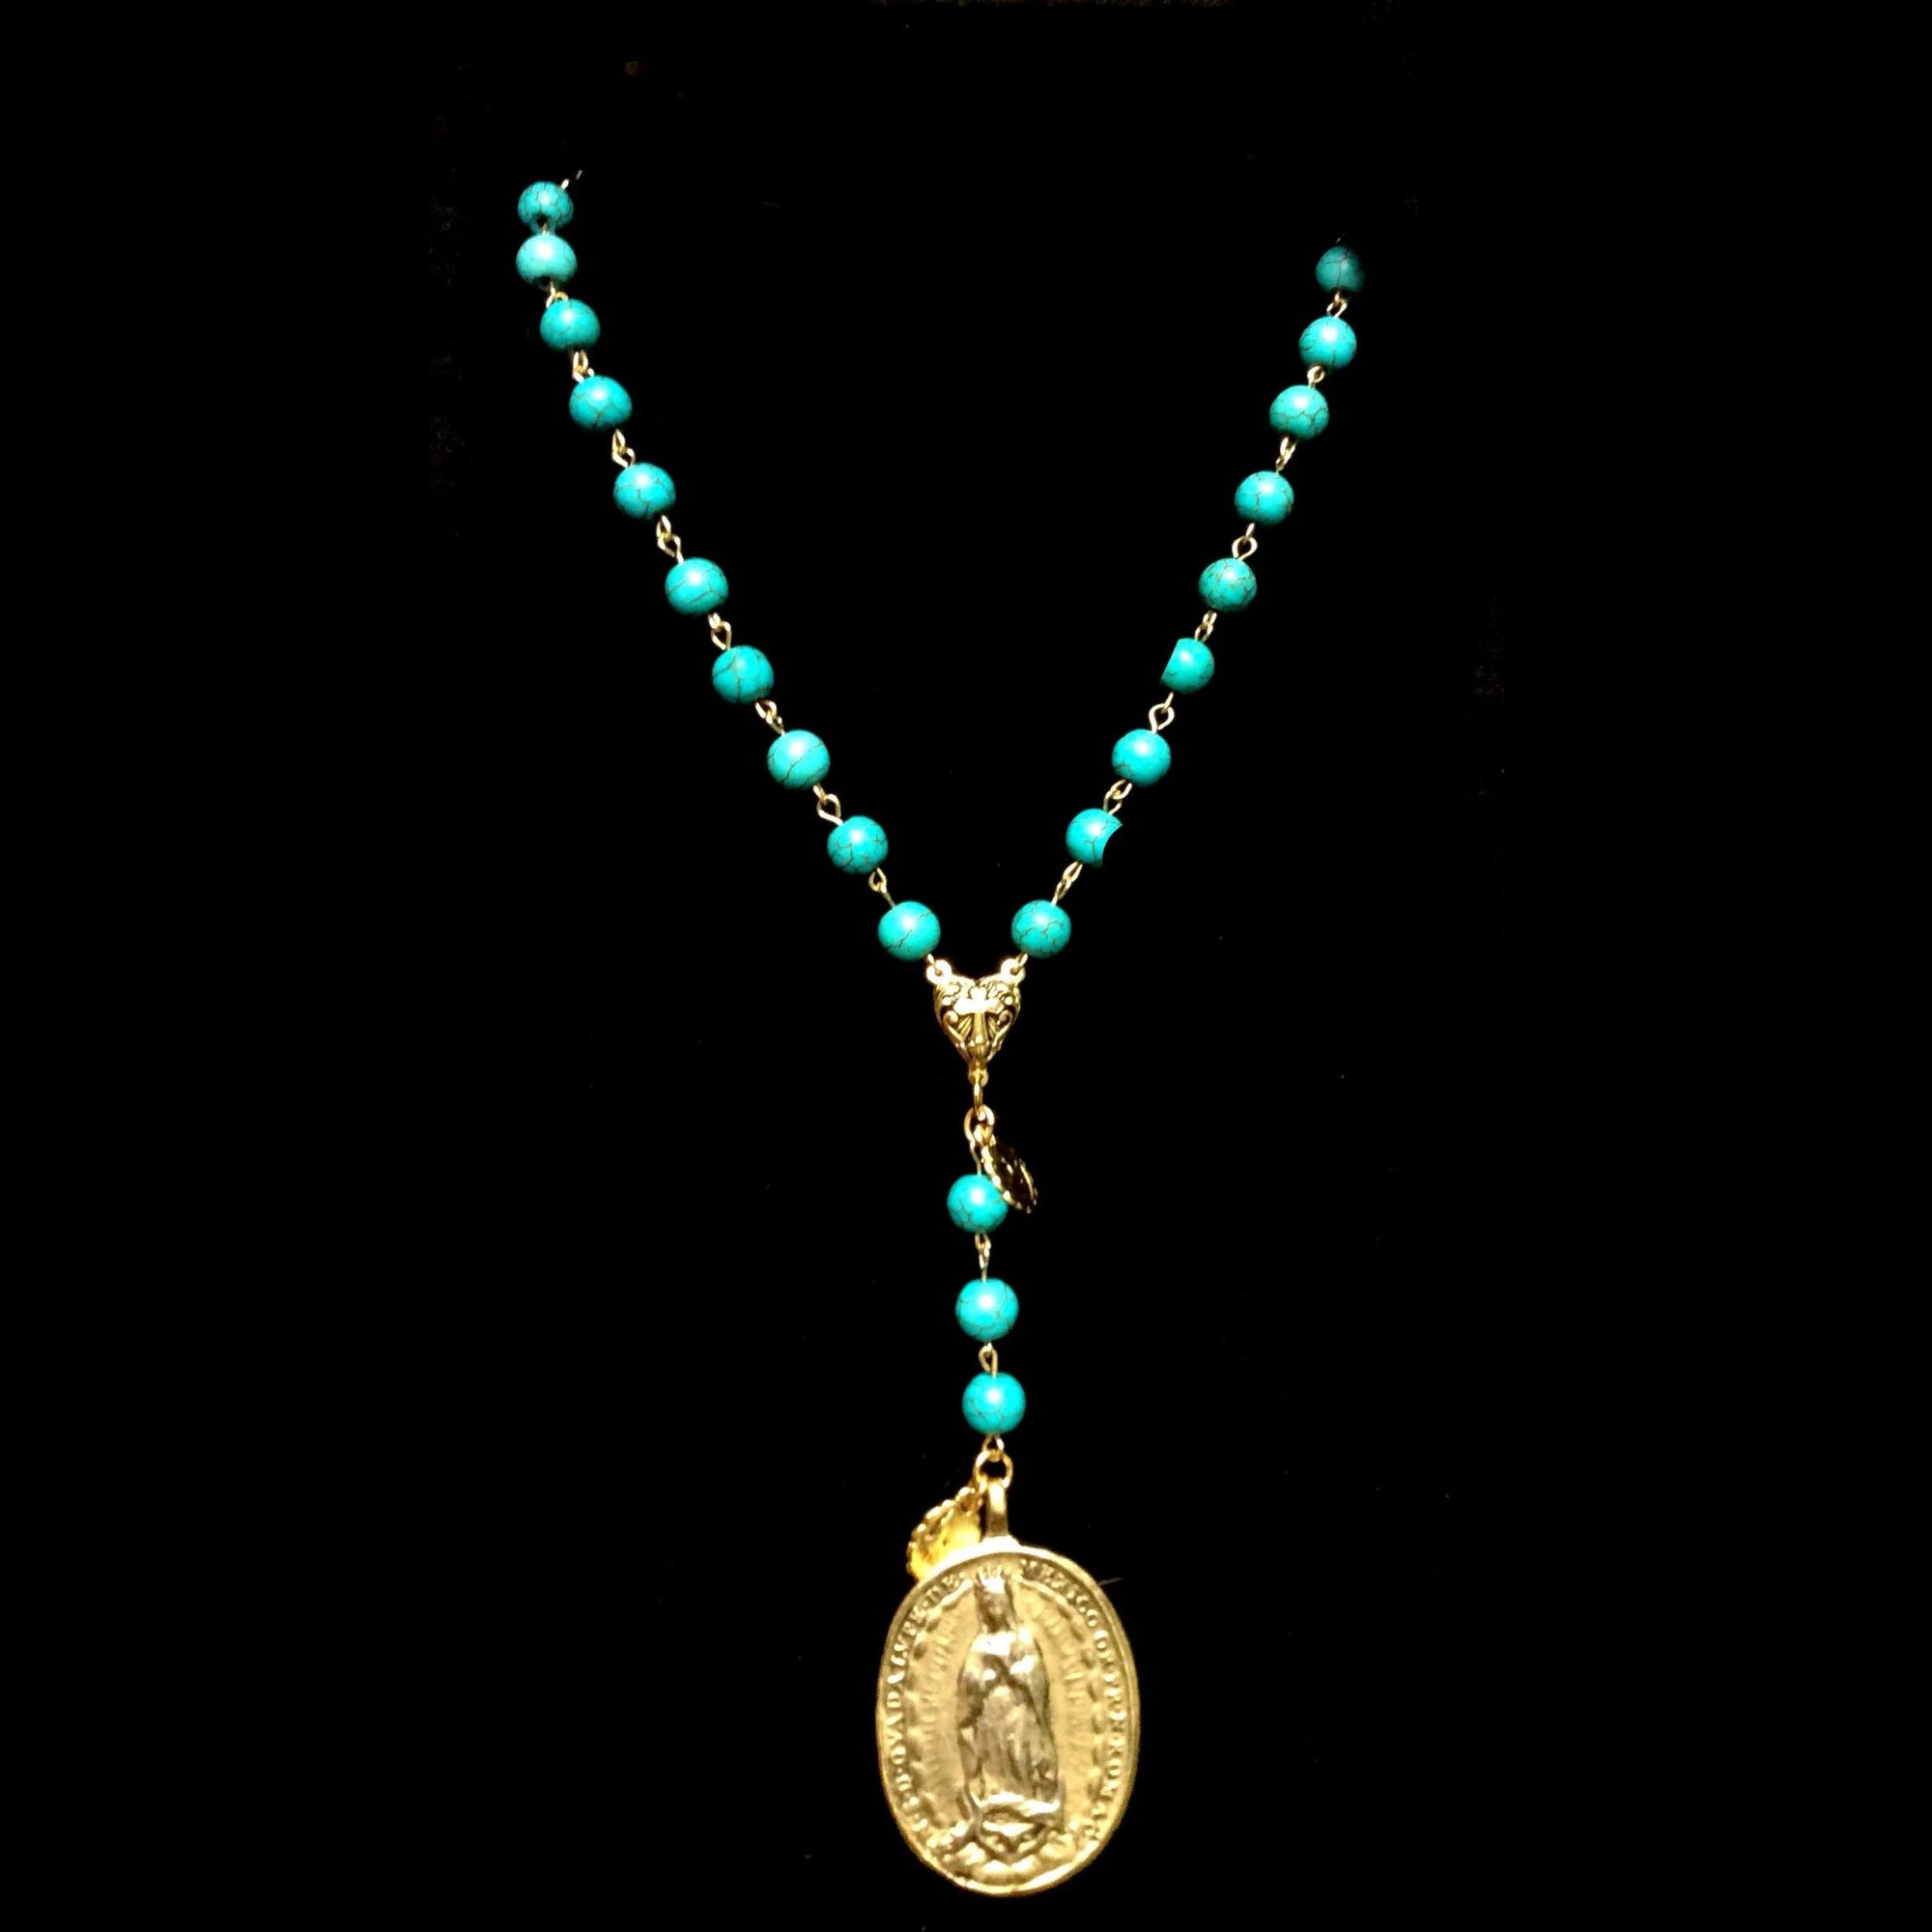 Cristo Rey Rosary Necklace with Saint Michael & Guadalupe in Turquoise